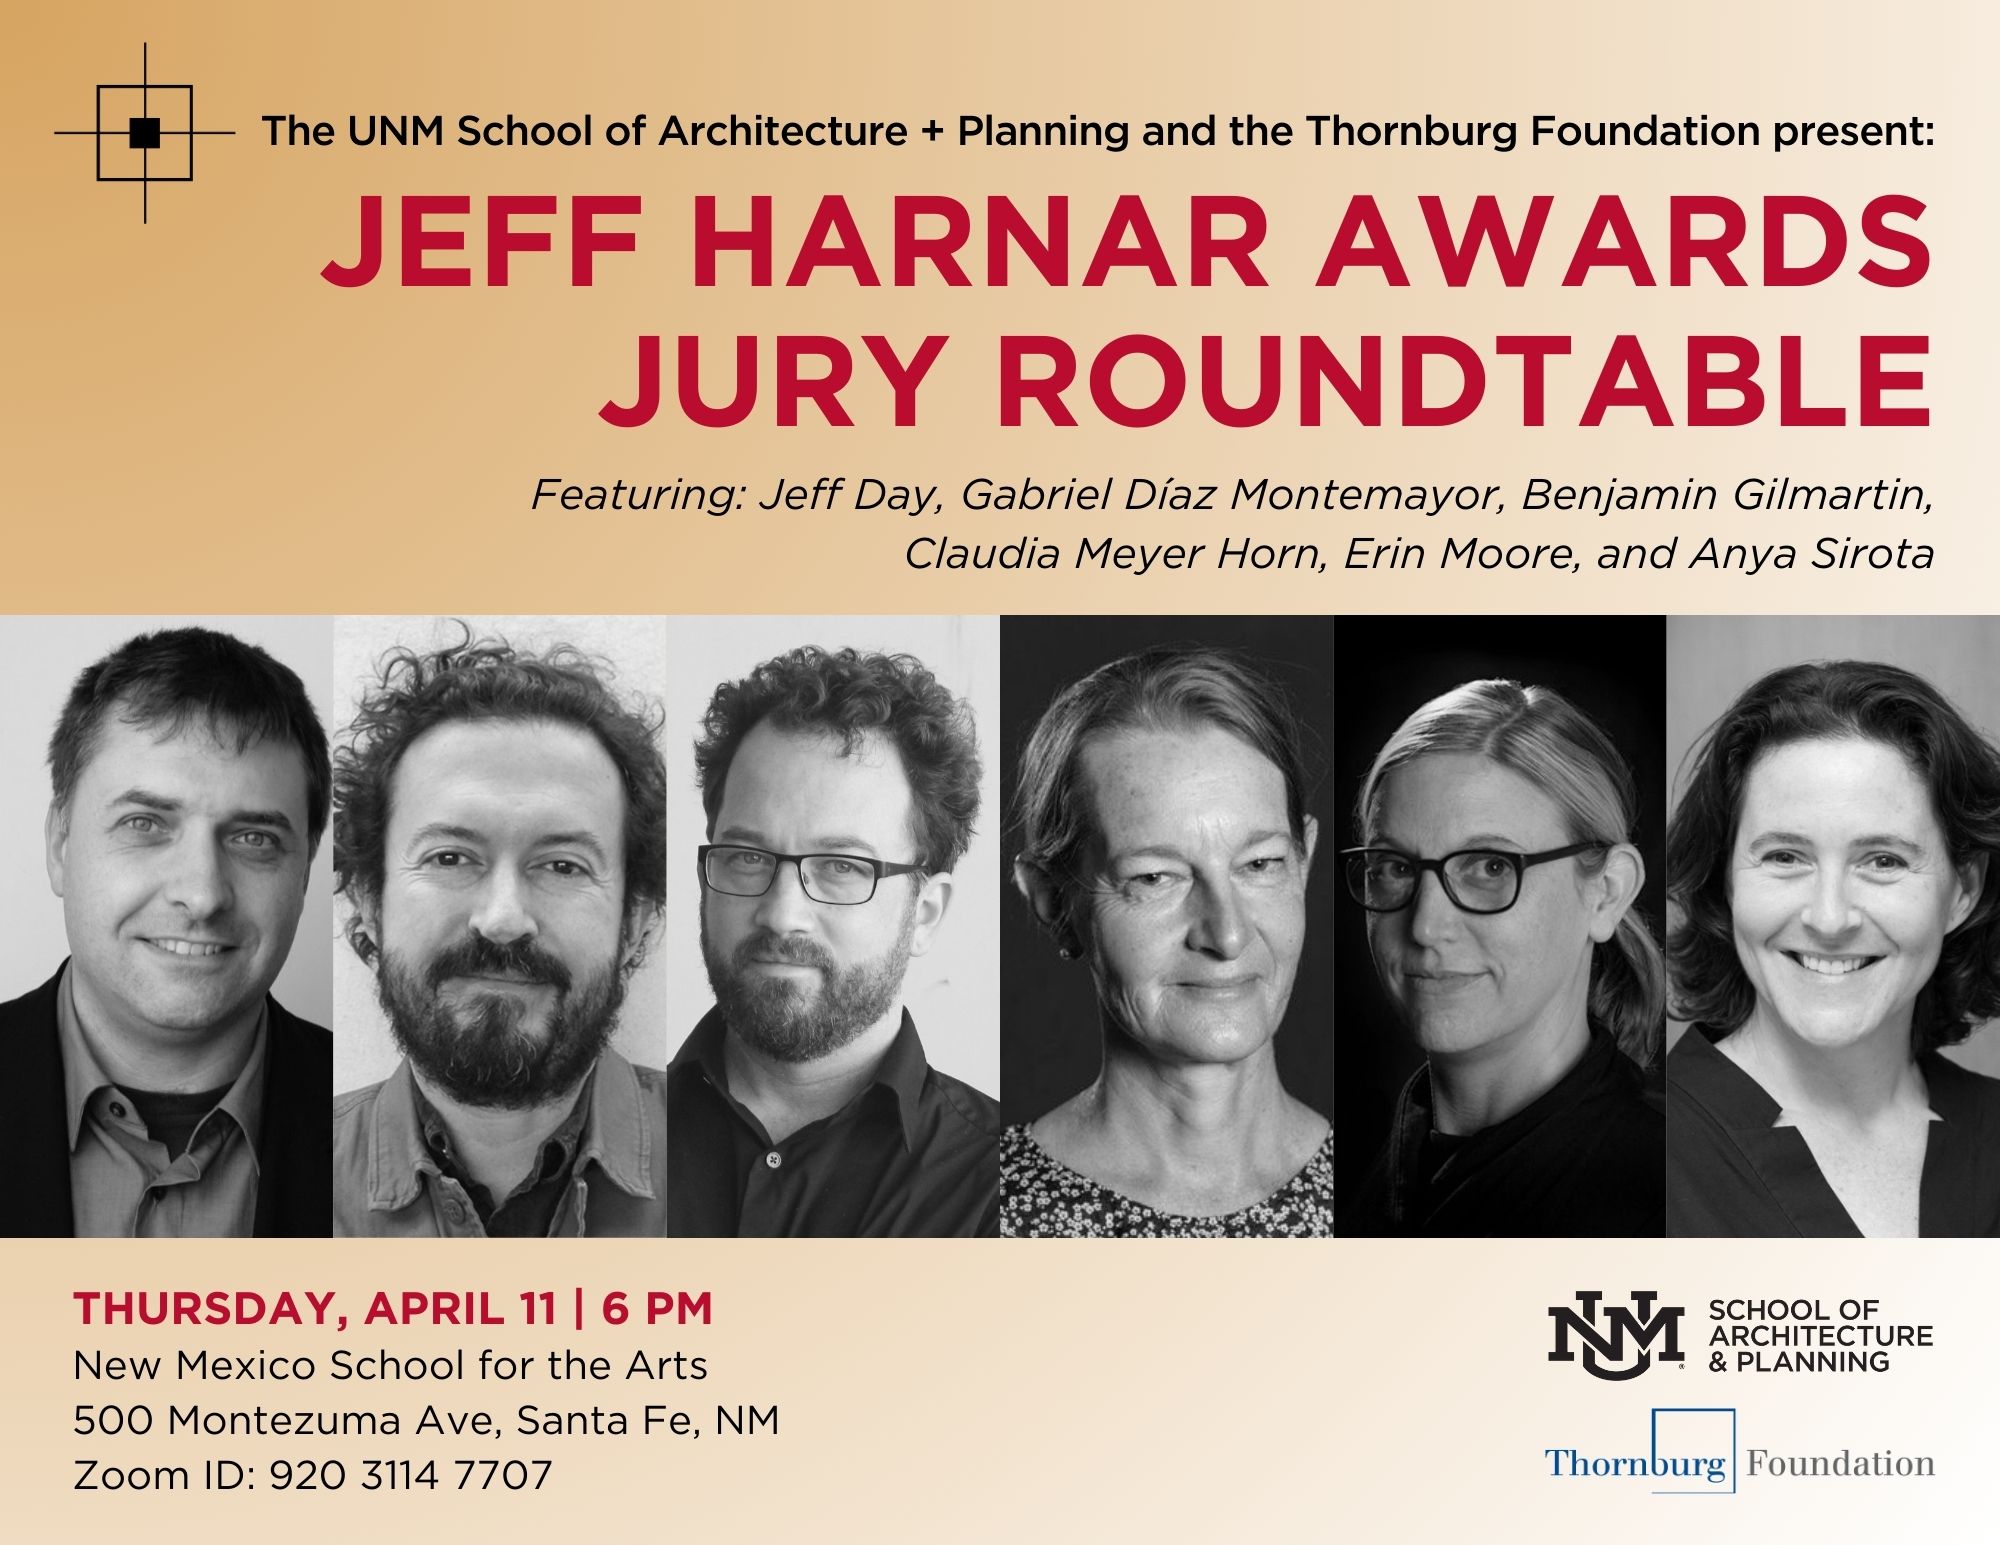 brochure image with photos of all the jeff harnar awards jury members